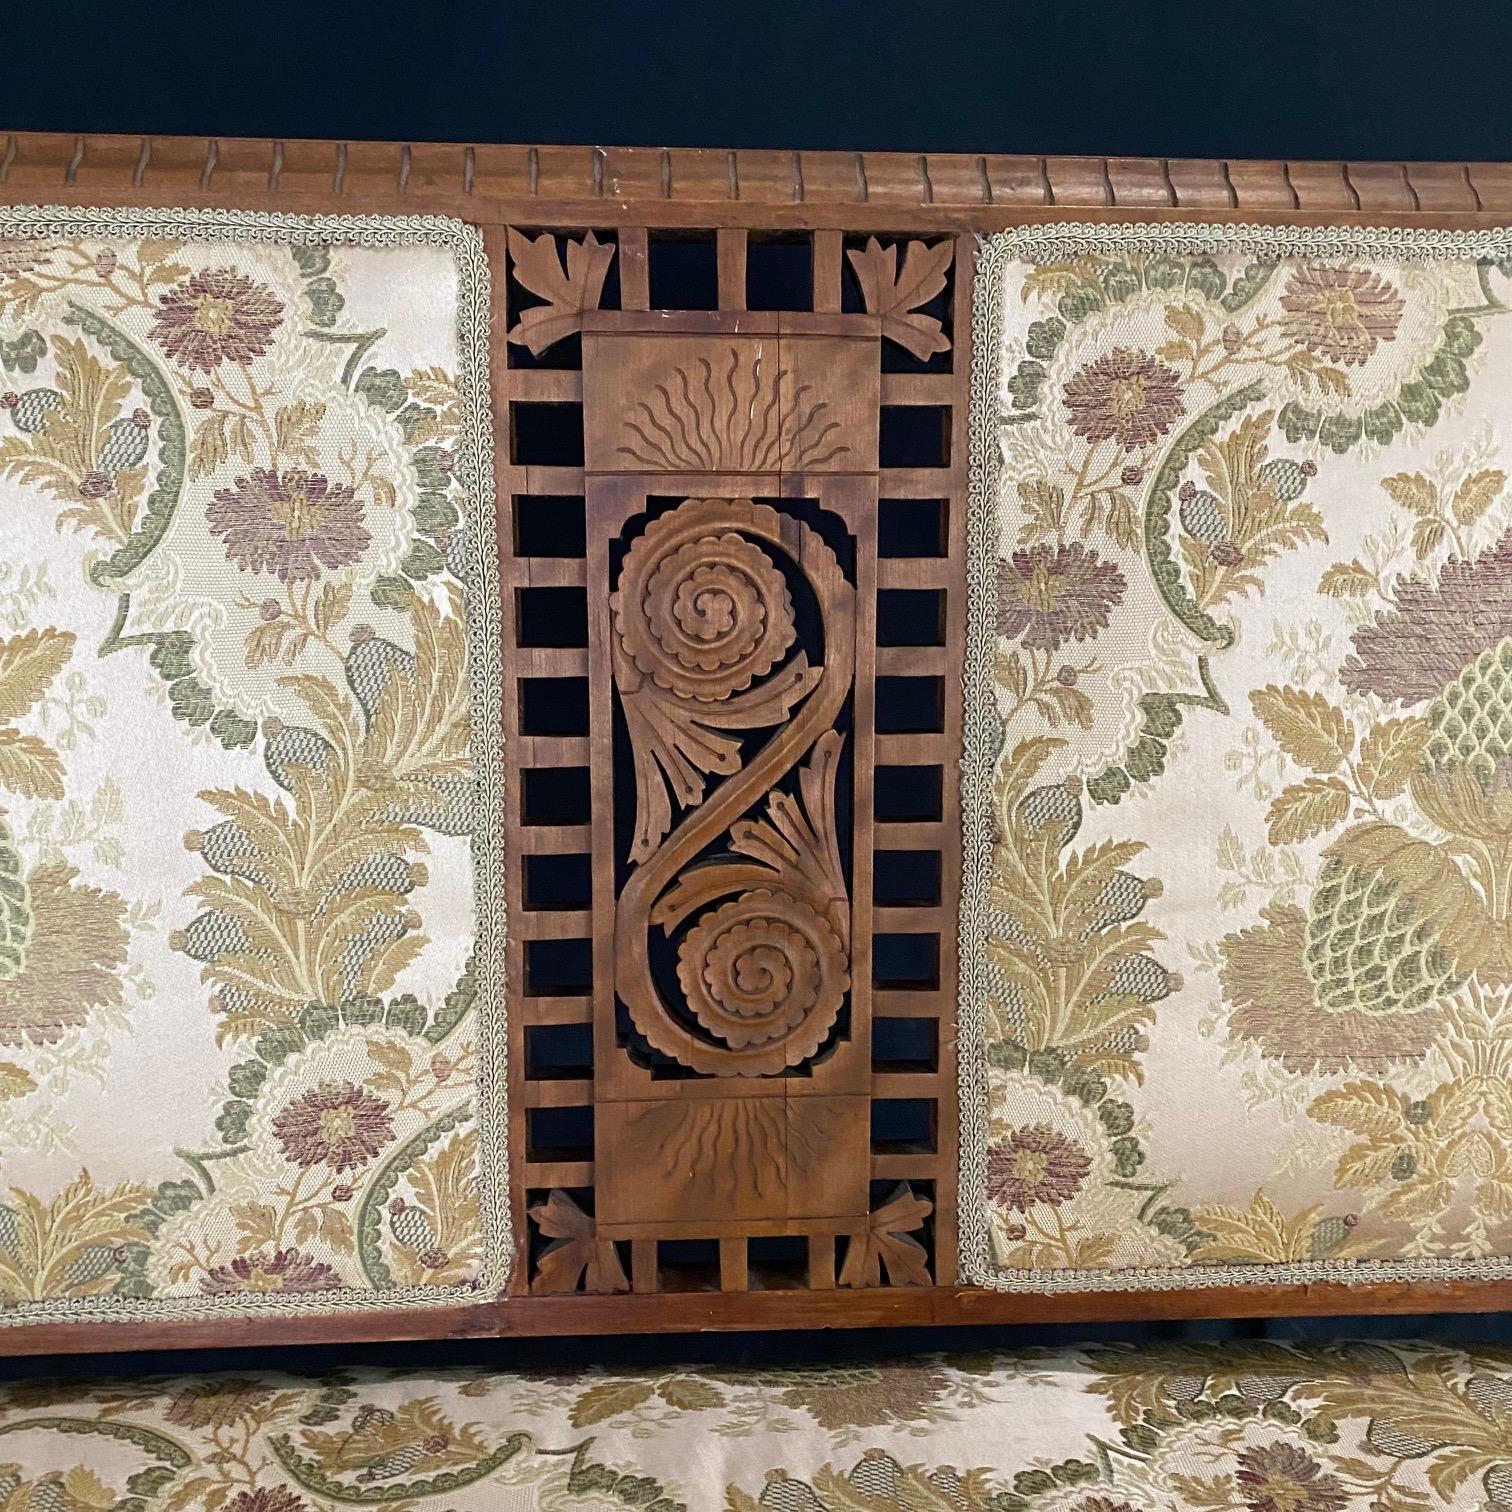 An Eastlake period sofa loveseat or settee centered with a stunning pierced crest having a pierced floral motif with the shape mirrored in the arm pediments. Beautiful outward rolled arms are finished with wooden panels carved with scrolled details,